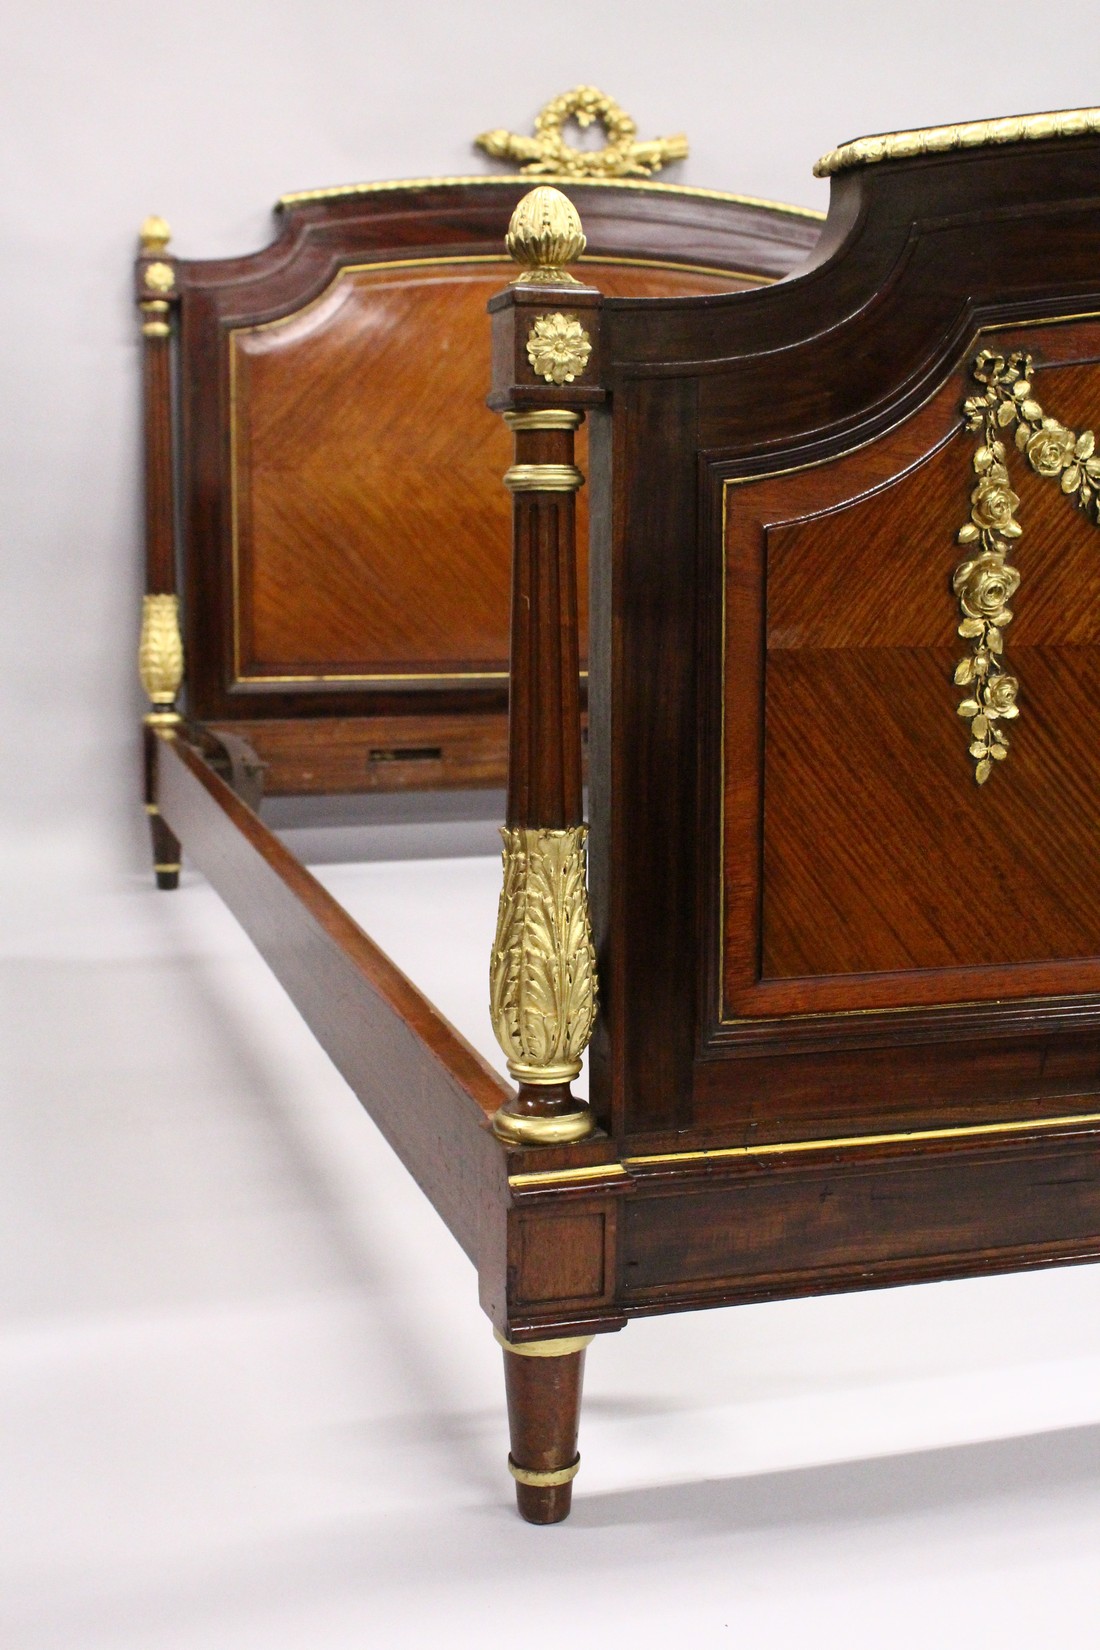 A GOOD LATE 19TH CENTURY FRENCH LOUIS XVI STYLE KINGWOOD MAHOGANY AND ORMOLU BED FRAME, the - Image 4 of 7